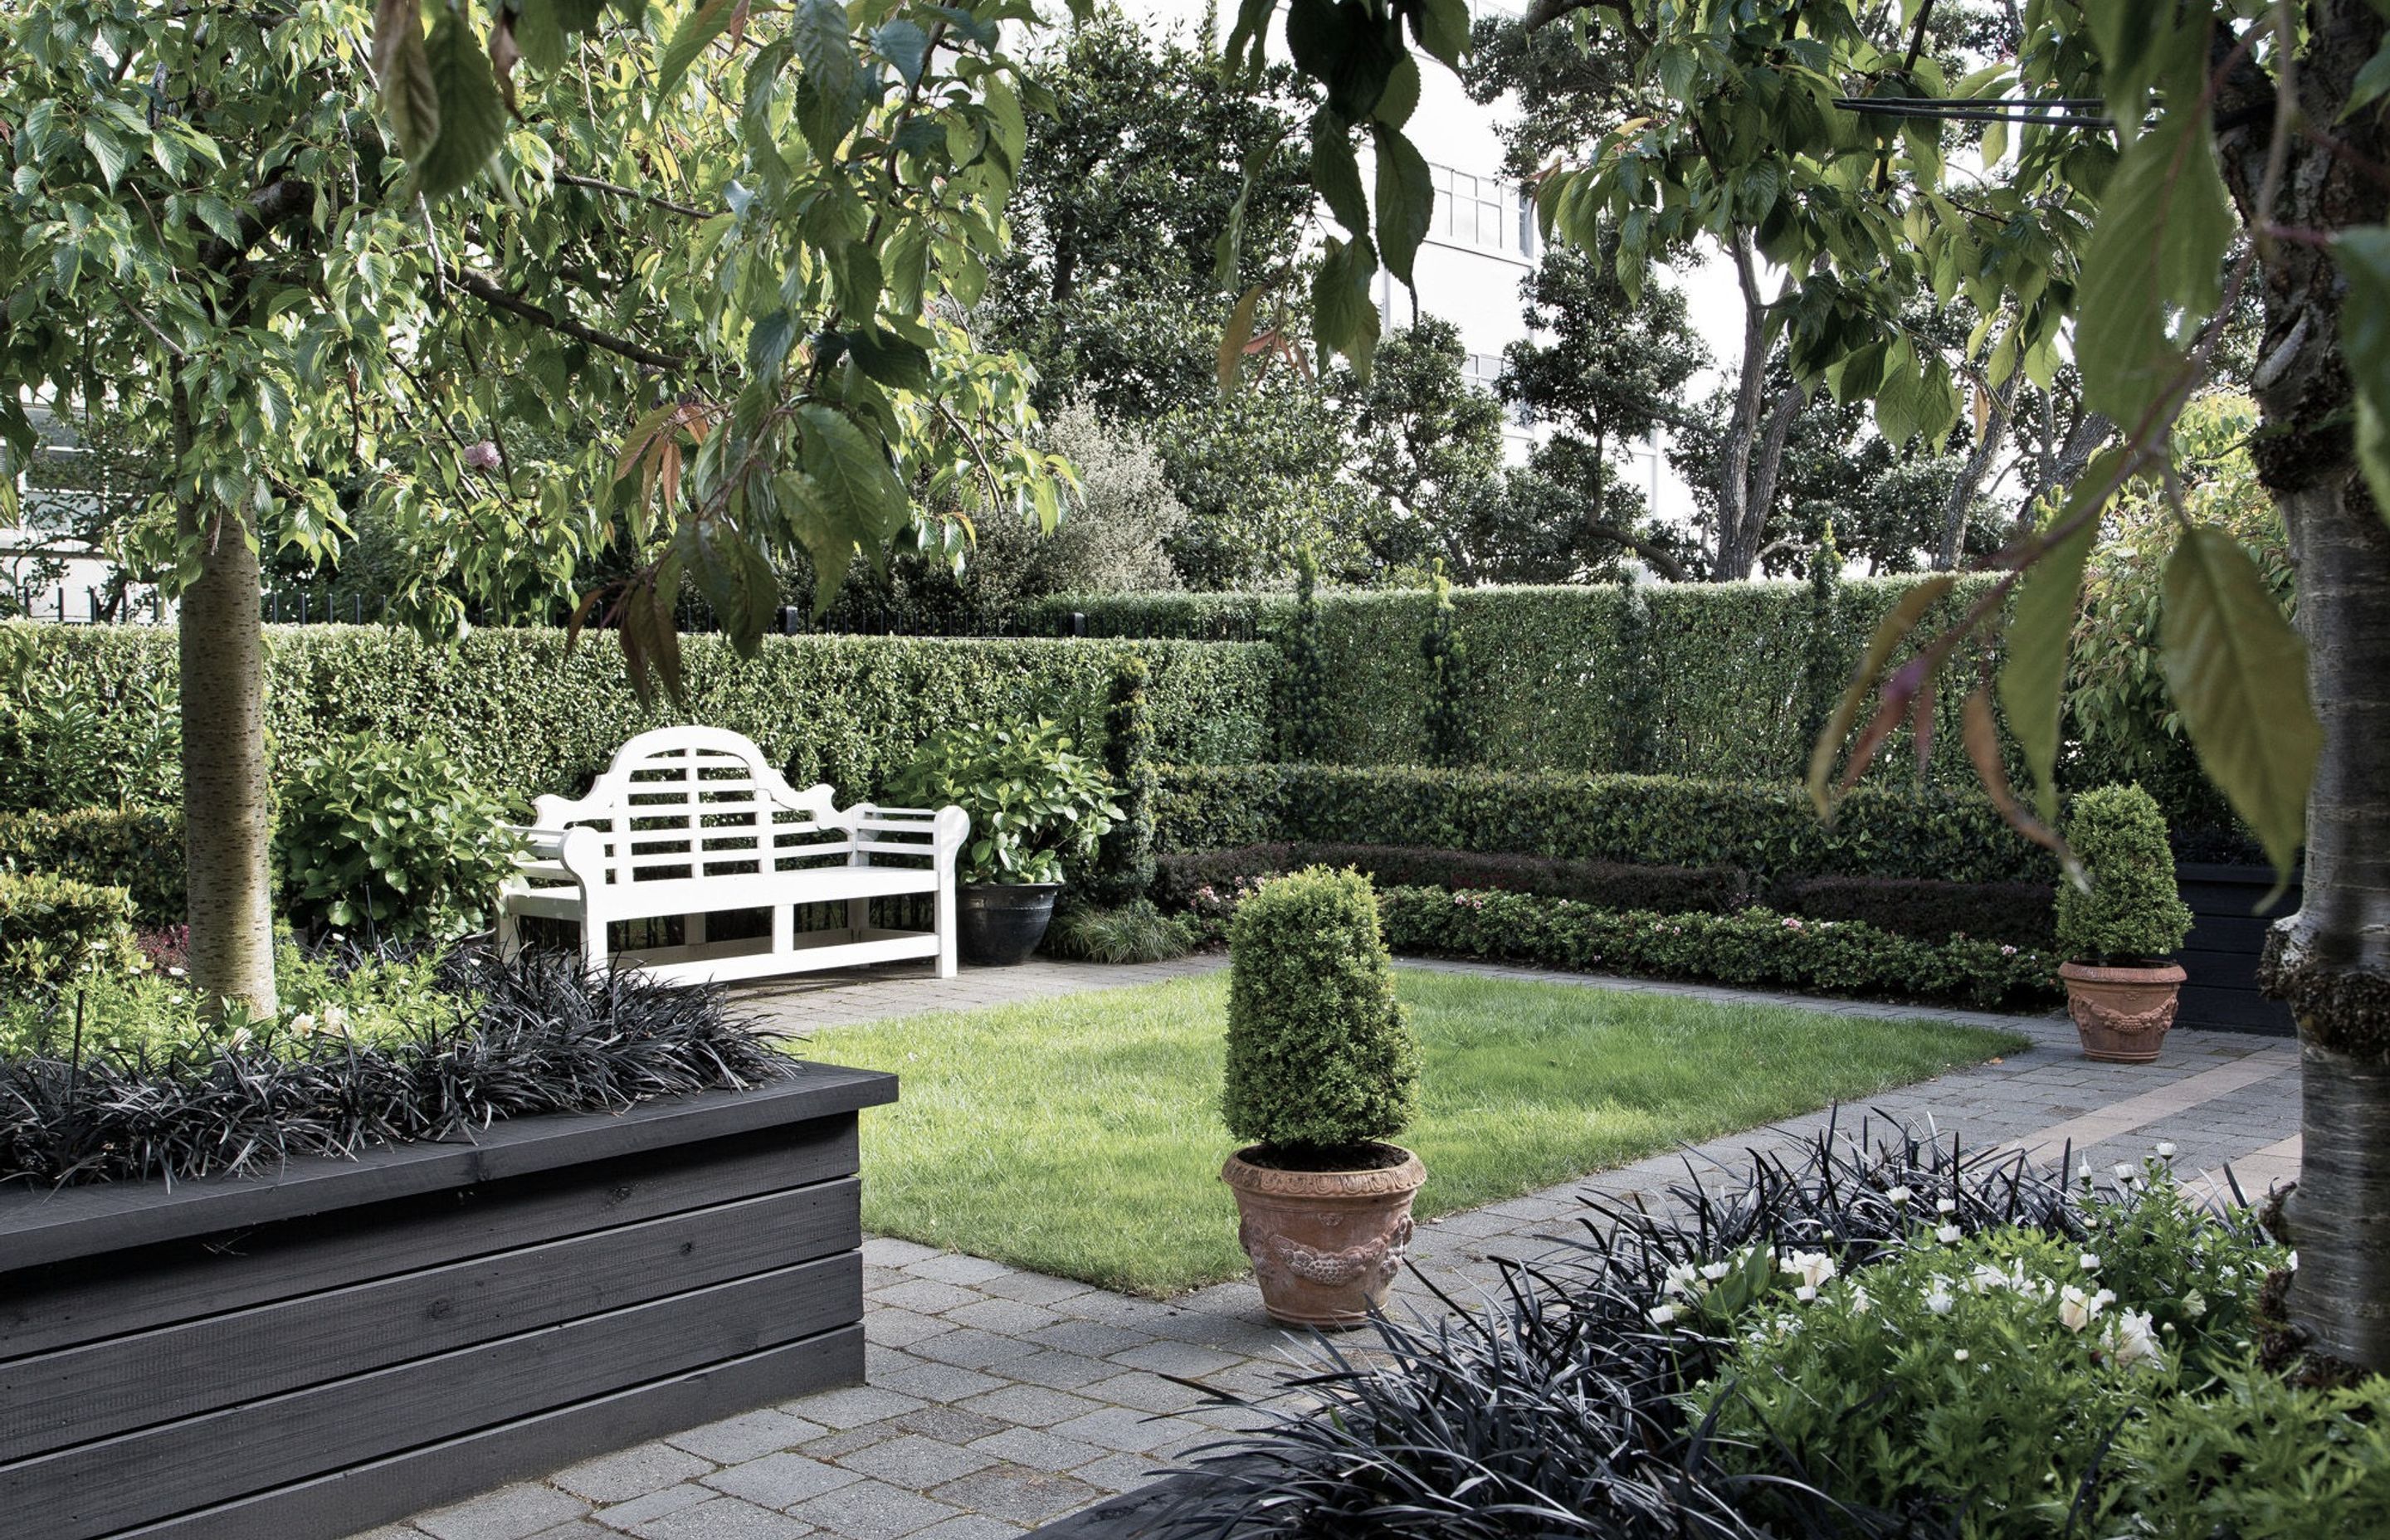 Formal courtyard garden, with layered hedges